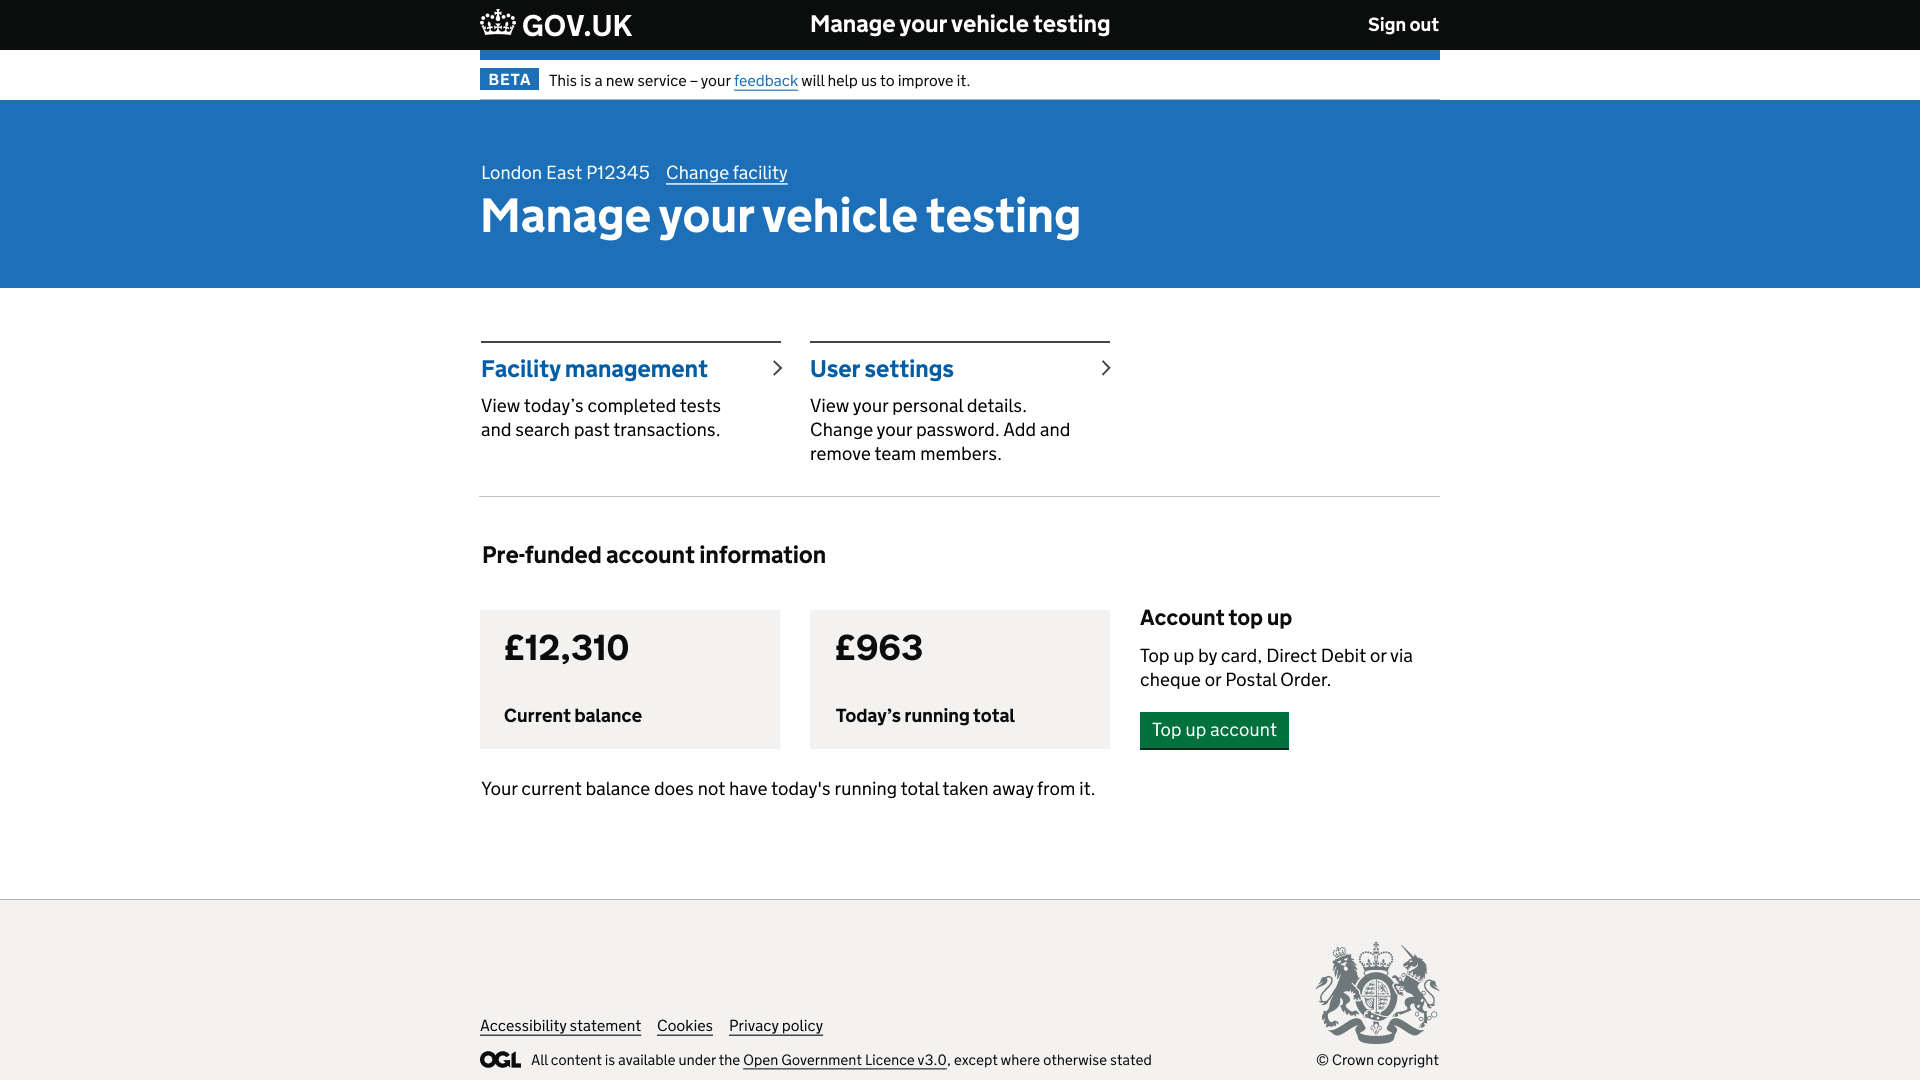 A screenshot of the "Manage your vehicle testing" homepage